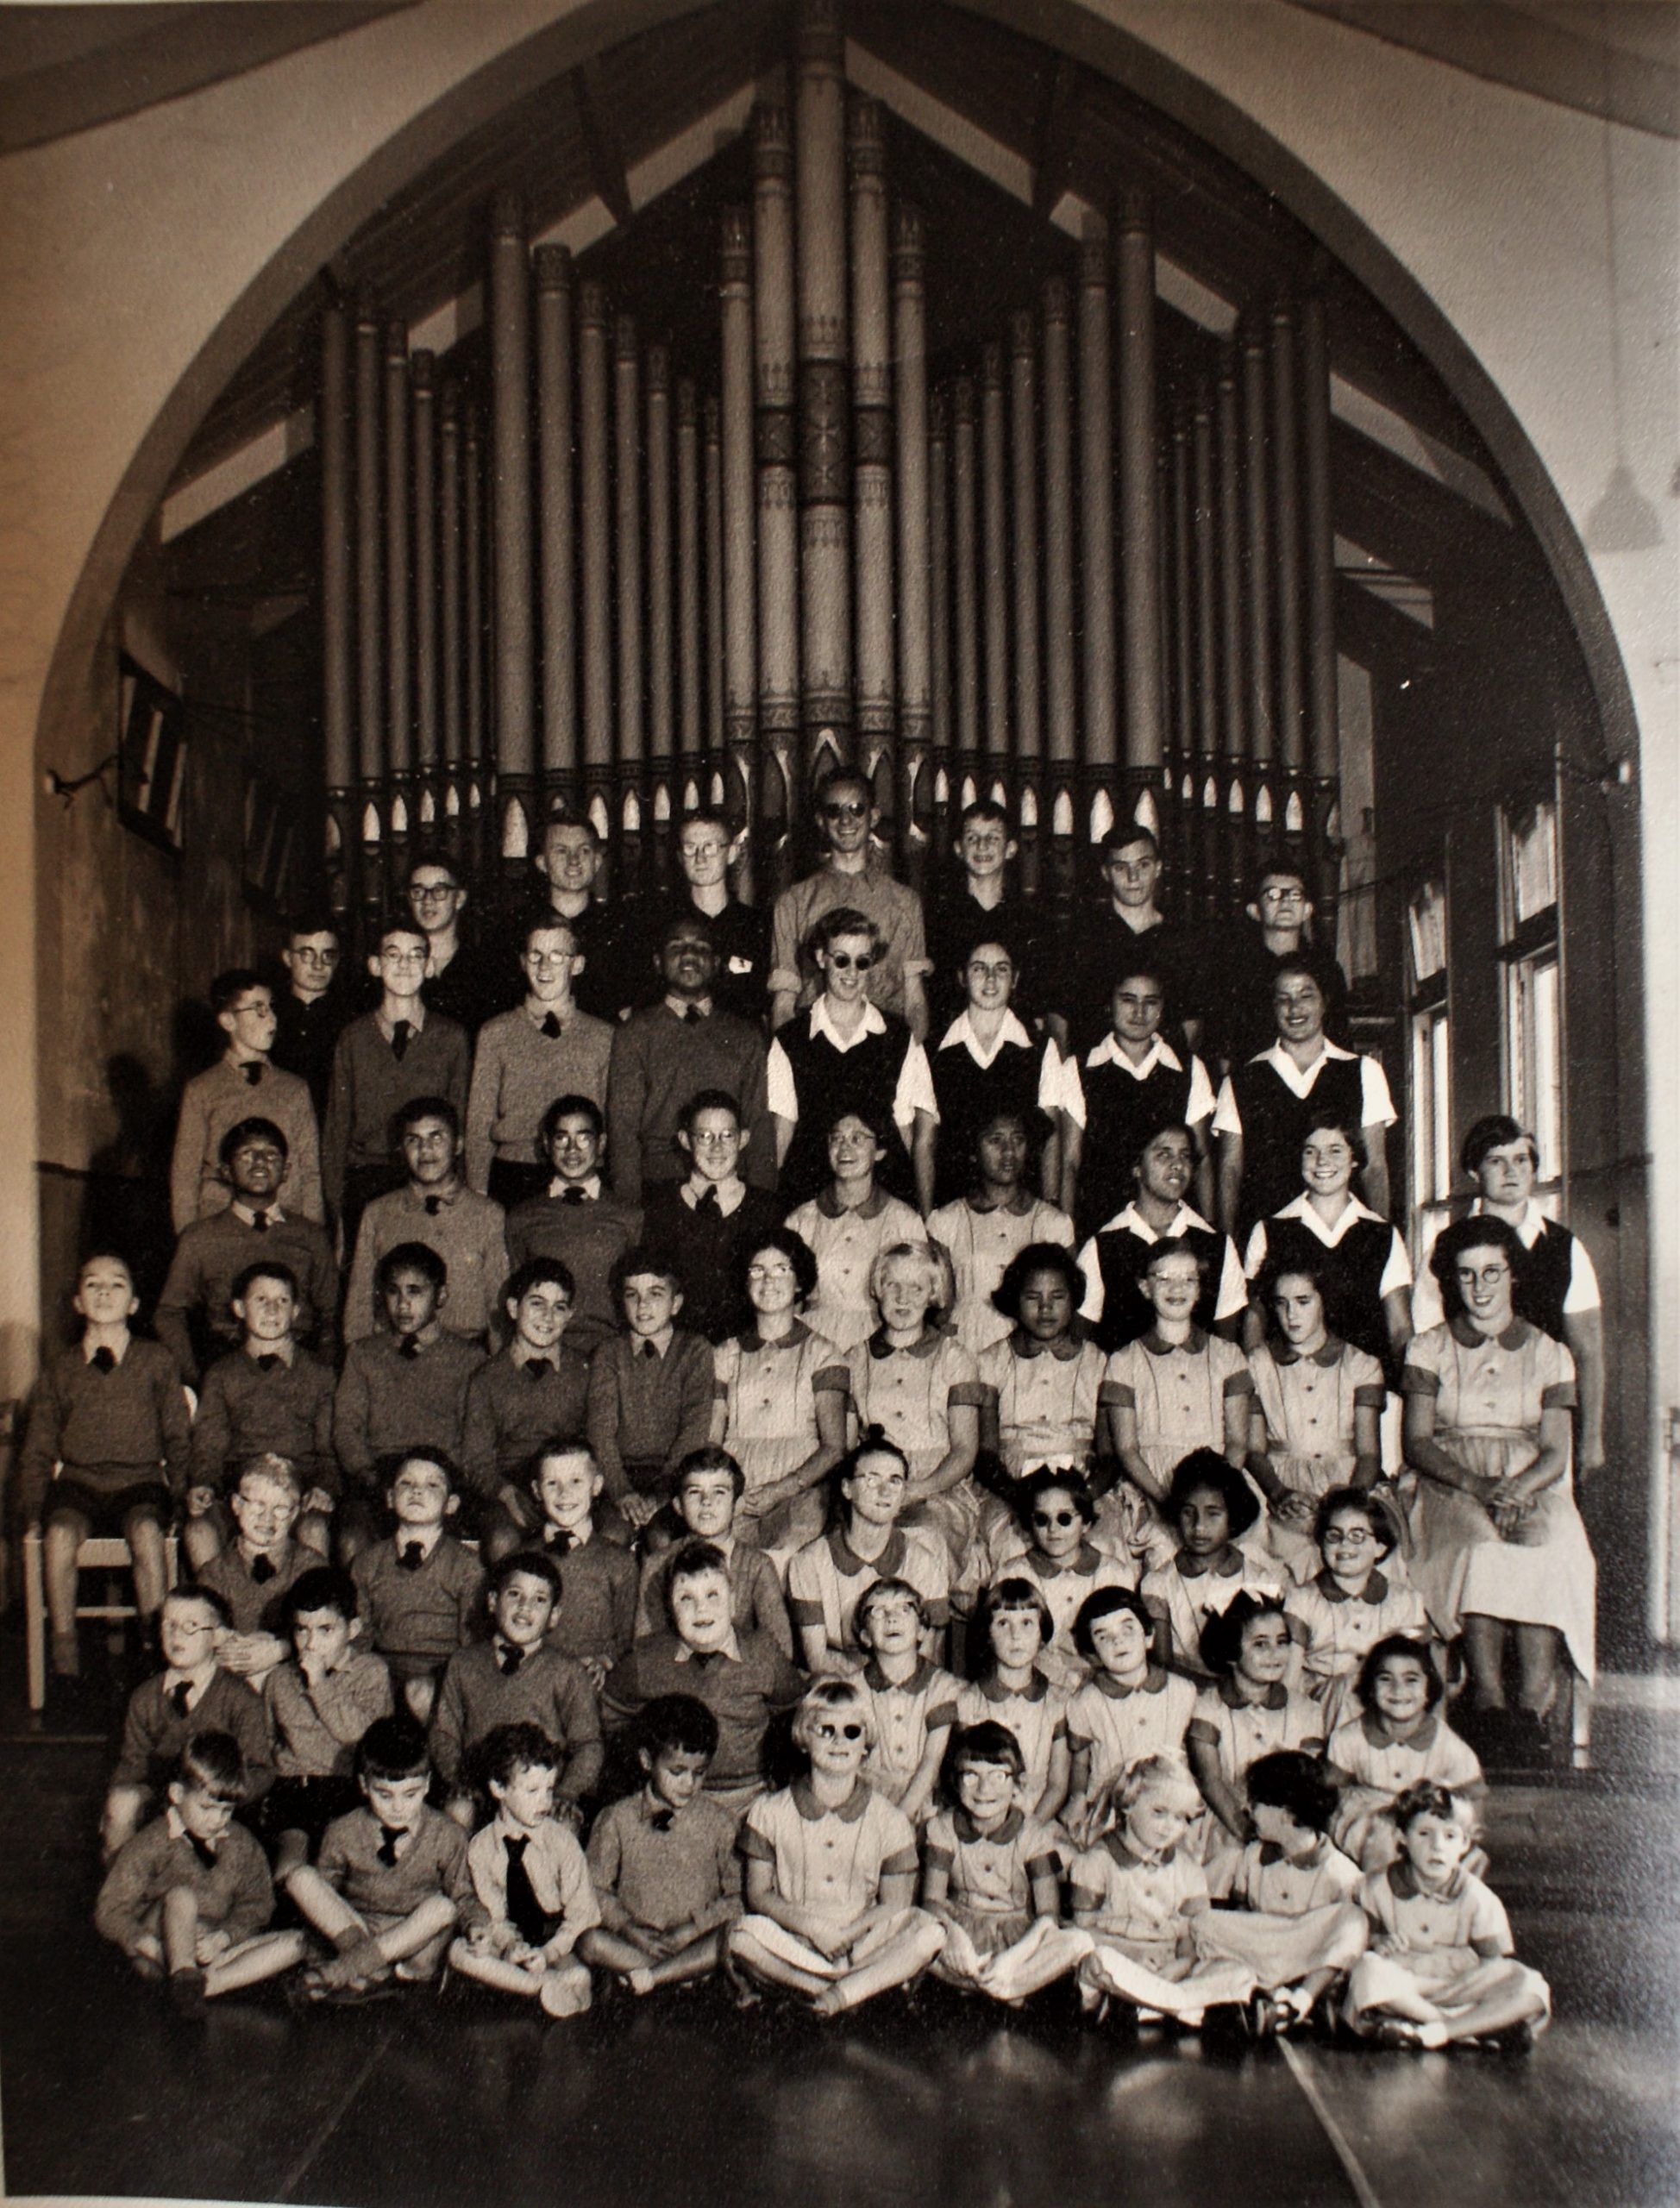 Seven rows of students are pictured in front of a set of organ pipes, possibly in a church. The older students st the back are standing. The youngest students are cross-legged on the floor in the front. Teenaged Lesley, wearing glasses and smiling is in the very centre of the group